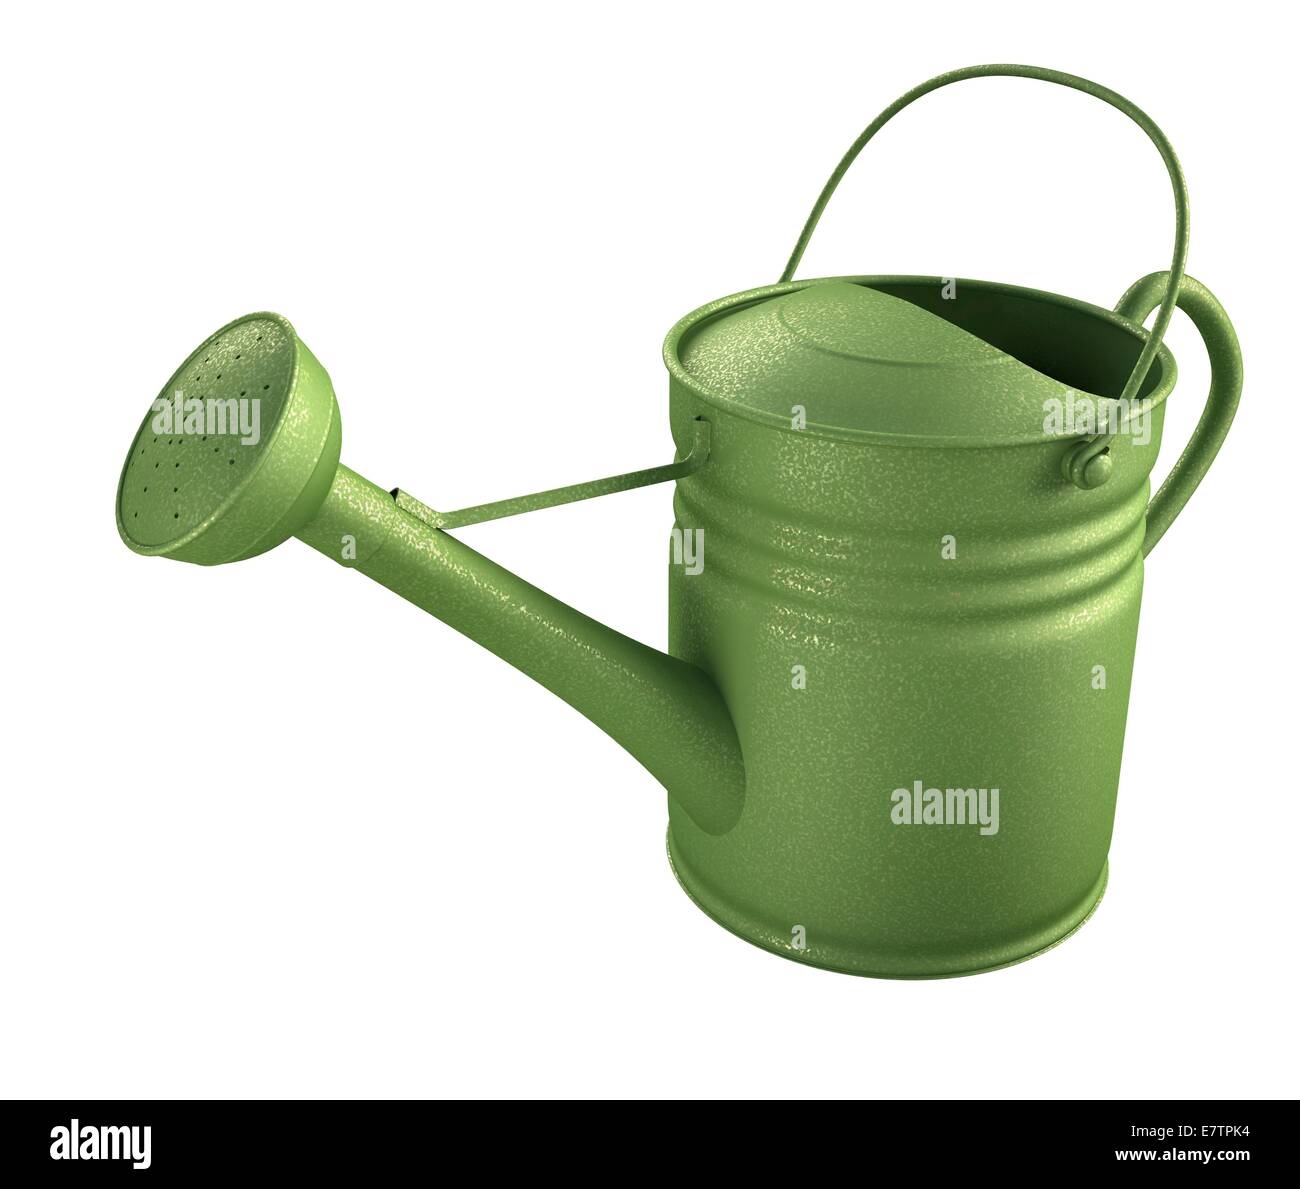 Green watering can against a white background, computer artwork. Stock Photo